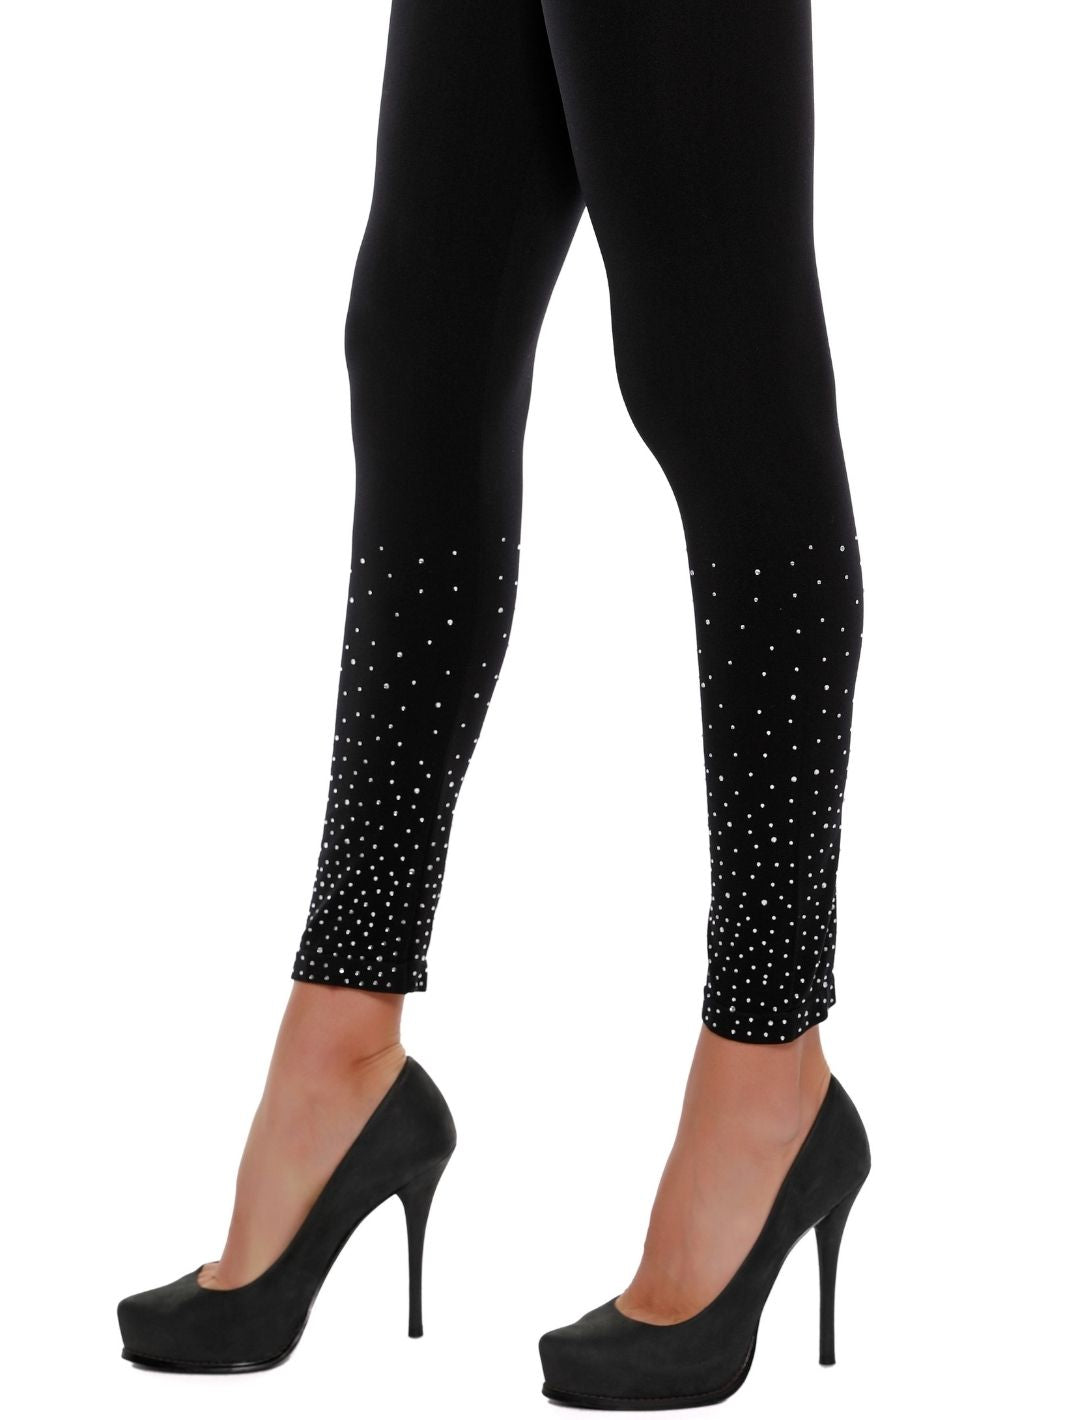 Women's Seamless Fashion Leggings with Scattered Rhinestones around the Lower Calf